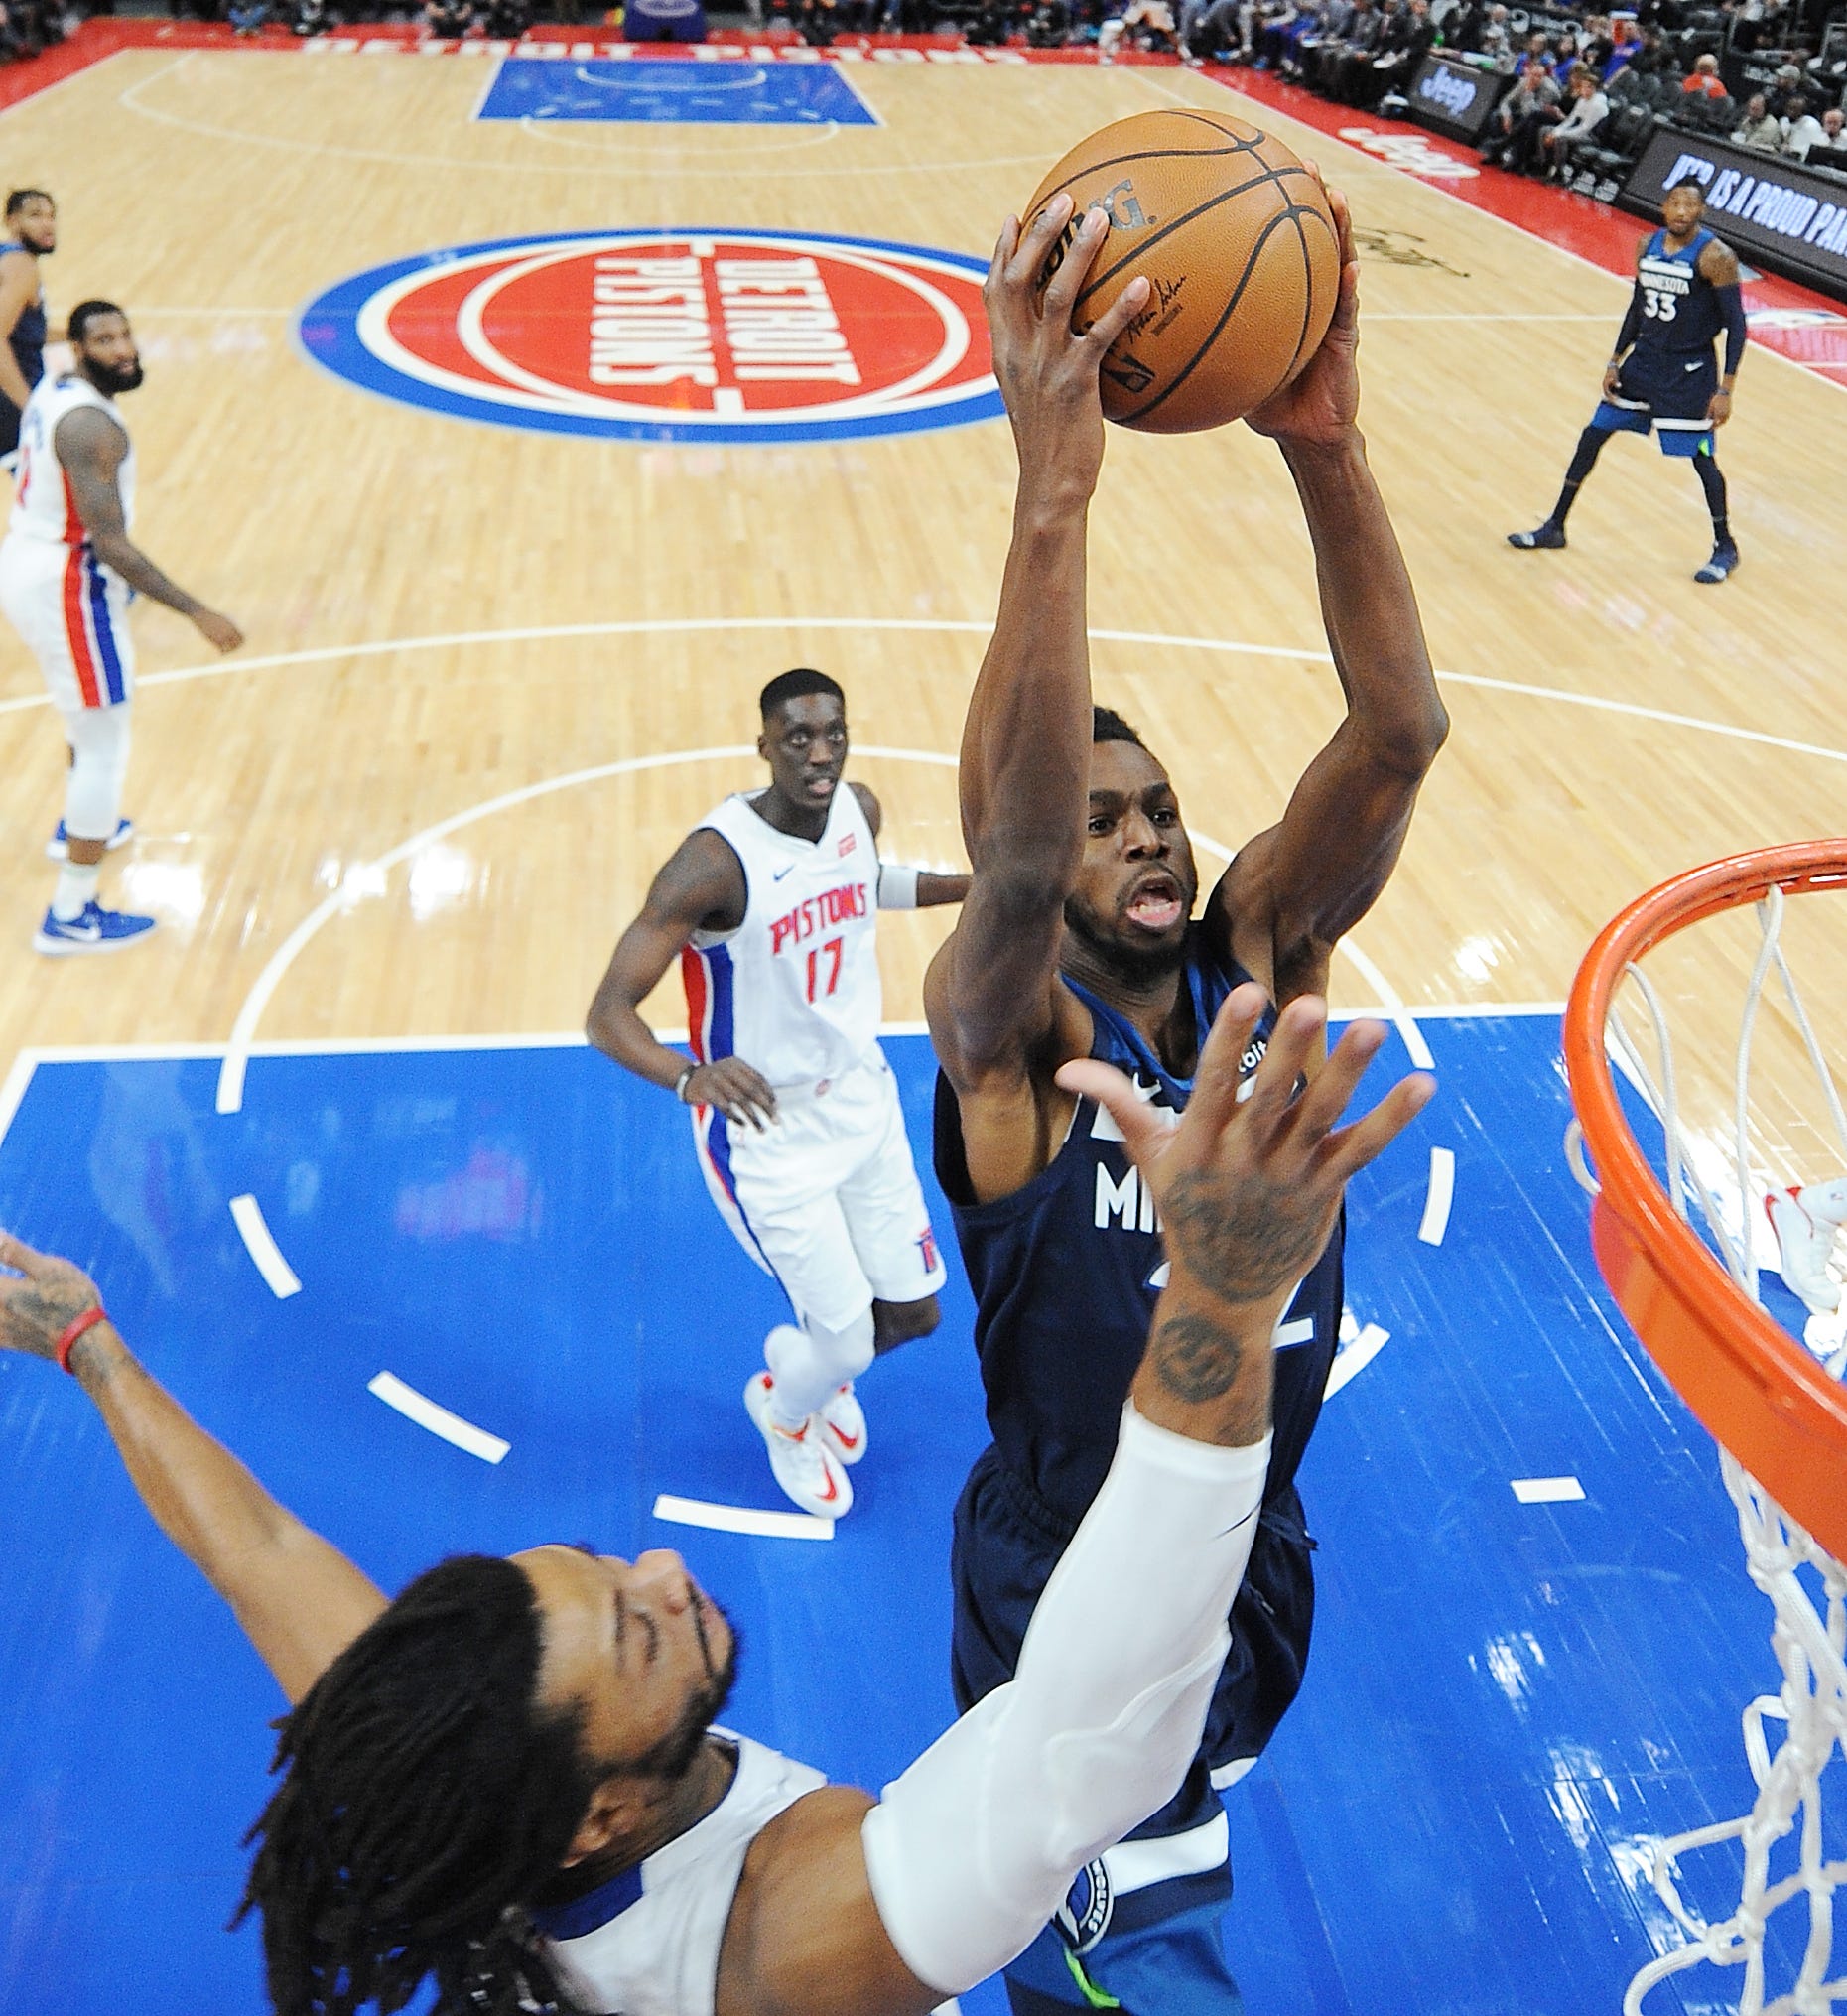 Timberwolves' Andrew Wiggins dunks over Pistons' Derrick Rose in the first quarter.